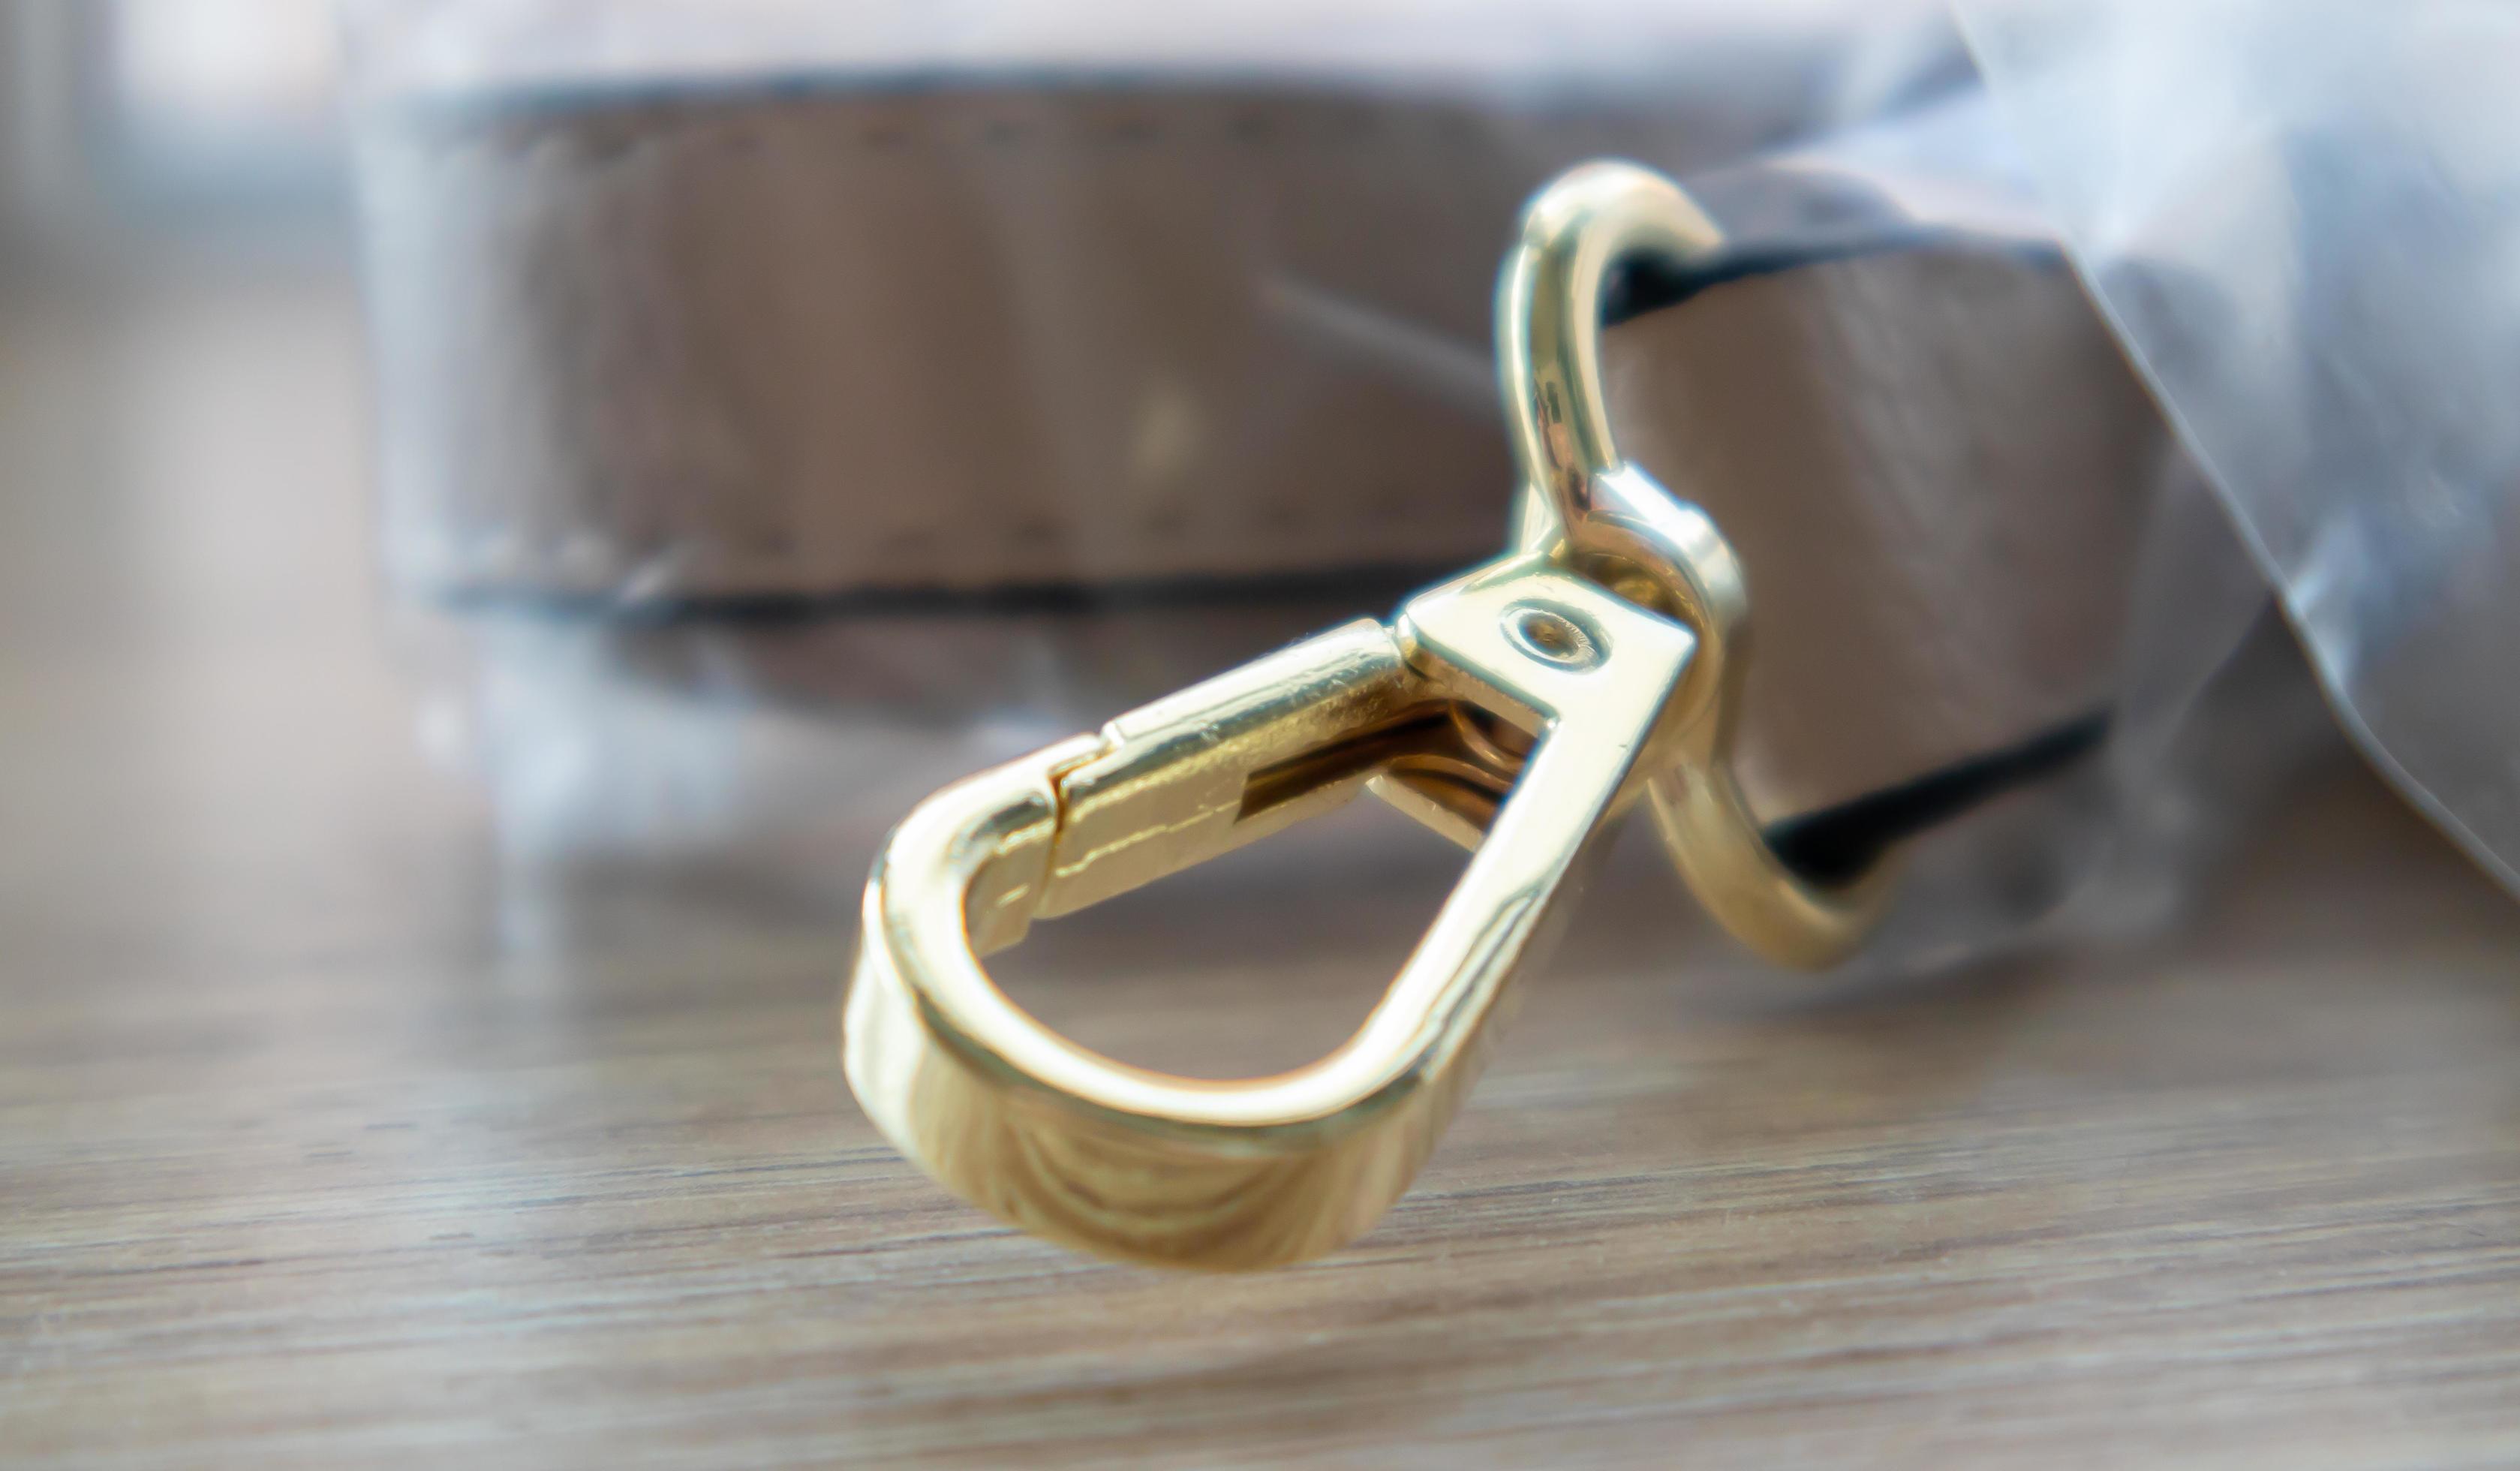 Swivel snap fastener with leather beige bag strap on a wooden background.  Metal carabiner with swivel clip or hook. Small gold fittings close-up in  selective focus. 4538241 Stock Photo at Vecteezy